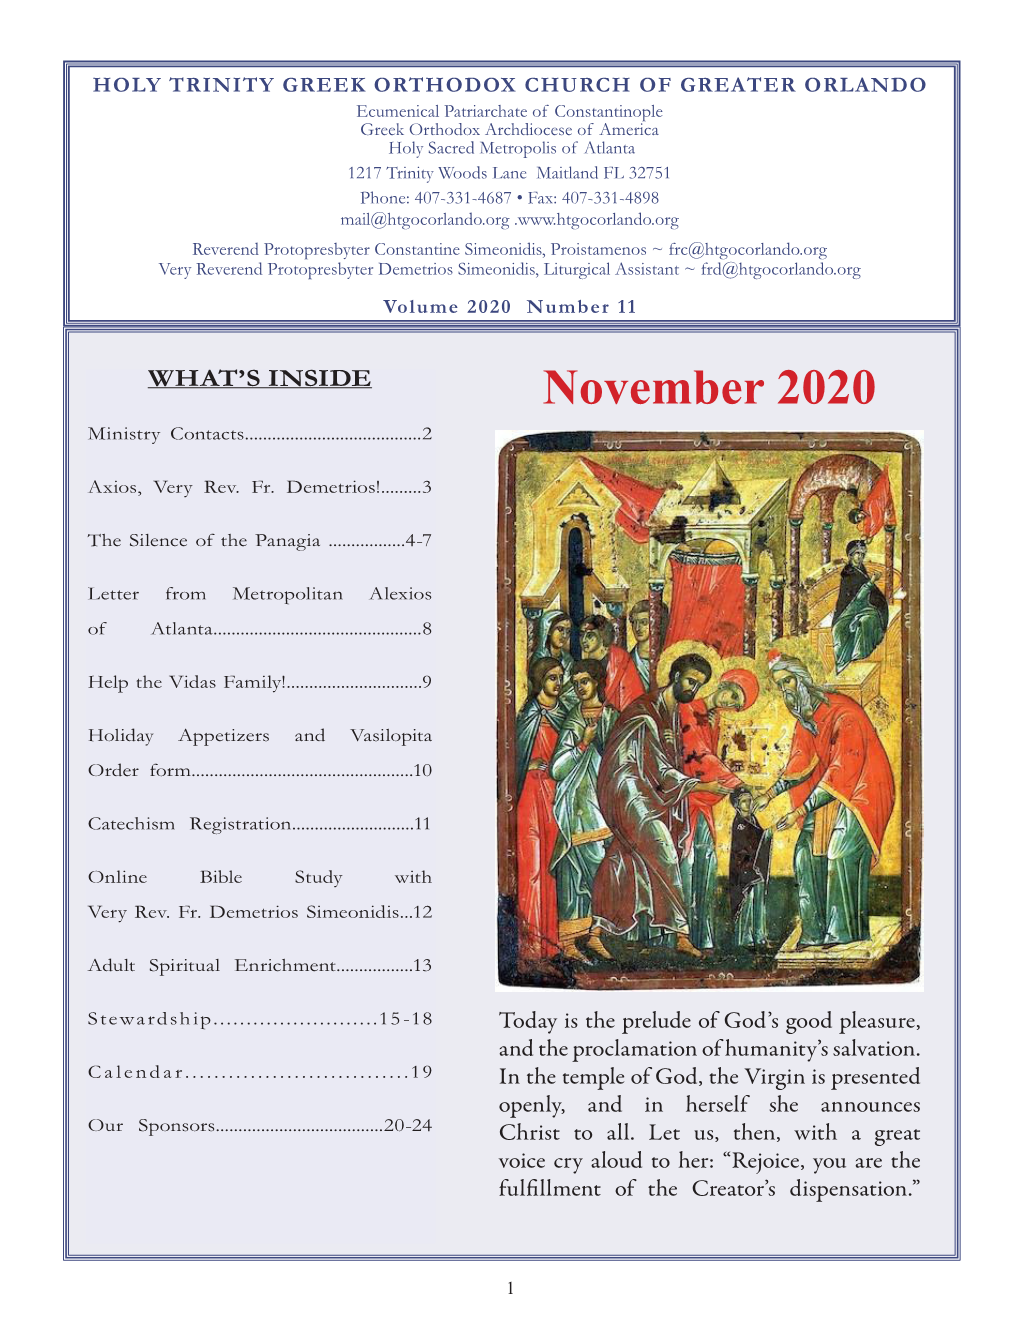 November 2020 Ministry Contacts